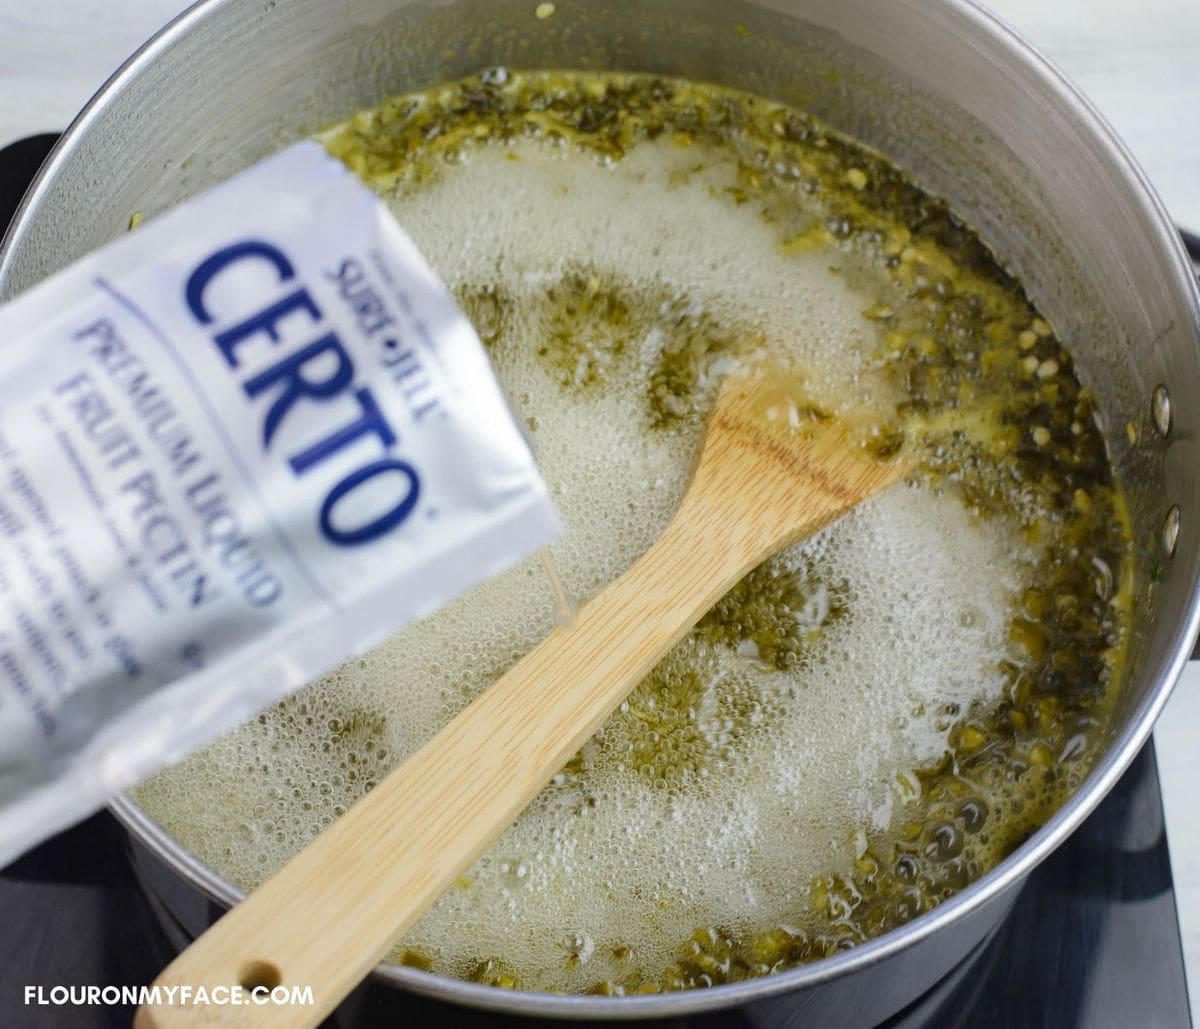 Adding liquid pectin to a pot of jalapeno jelly that has reached the rolling boil stage.